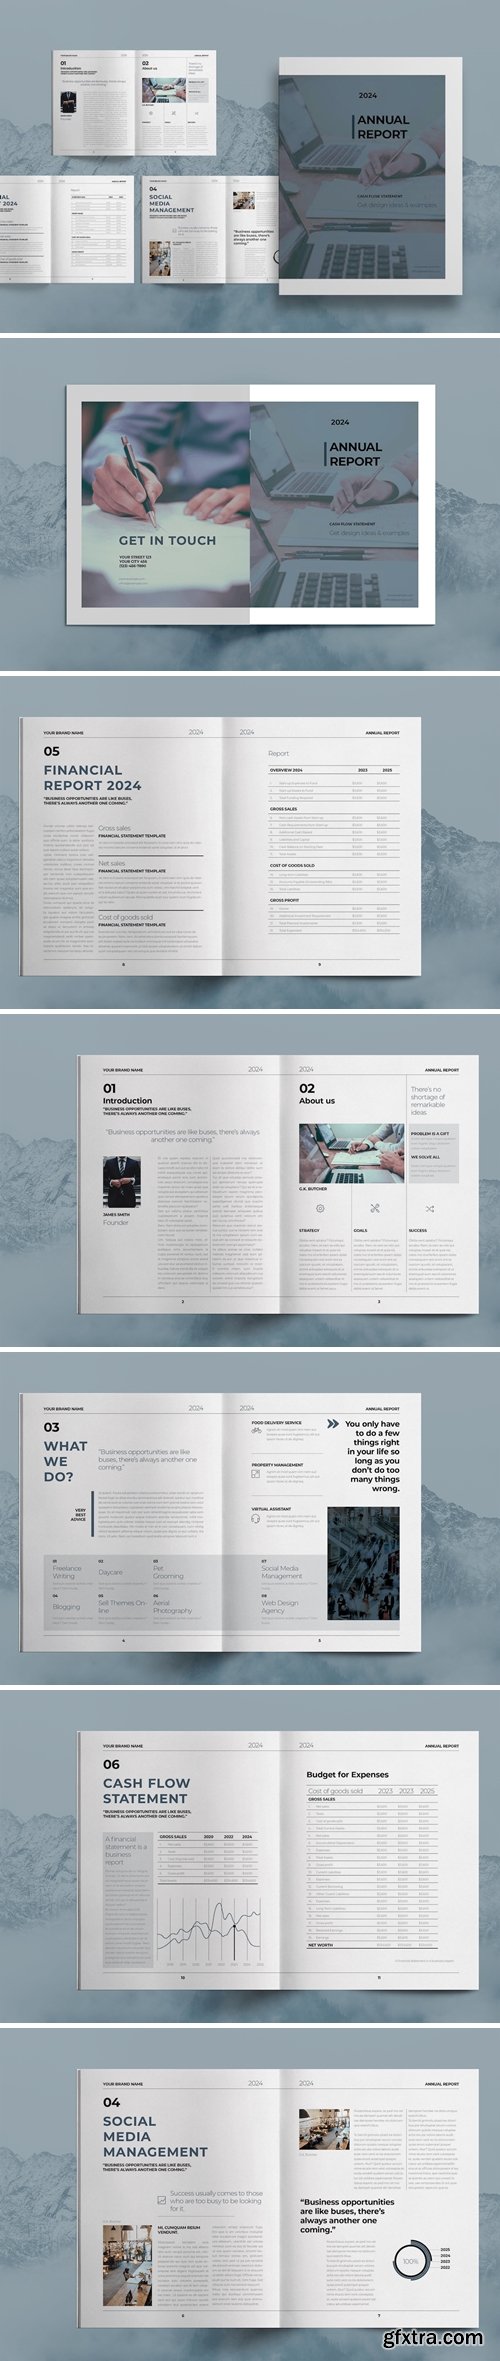 Blue Annual Report Template JUY5QX2